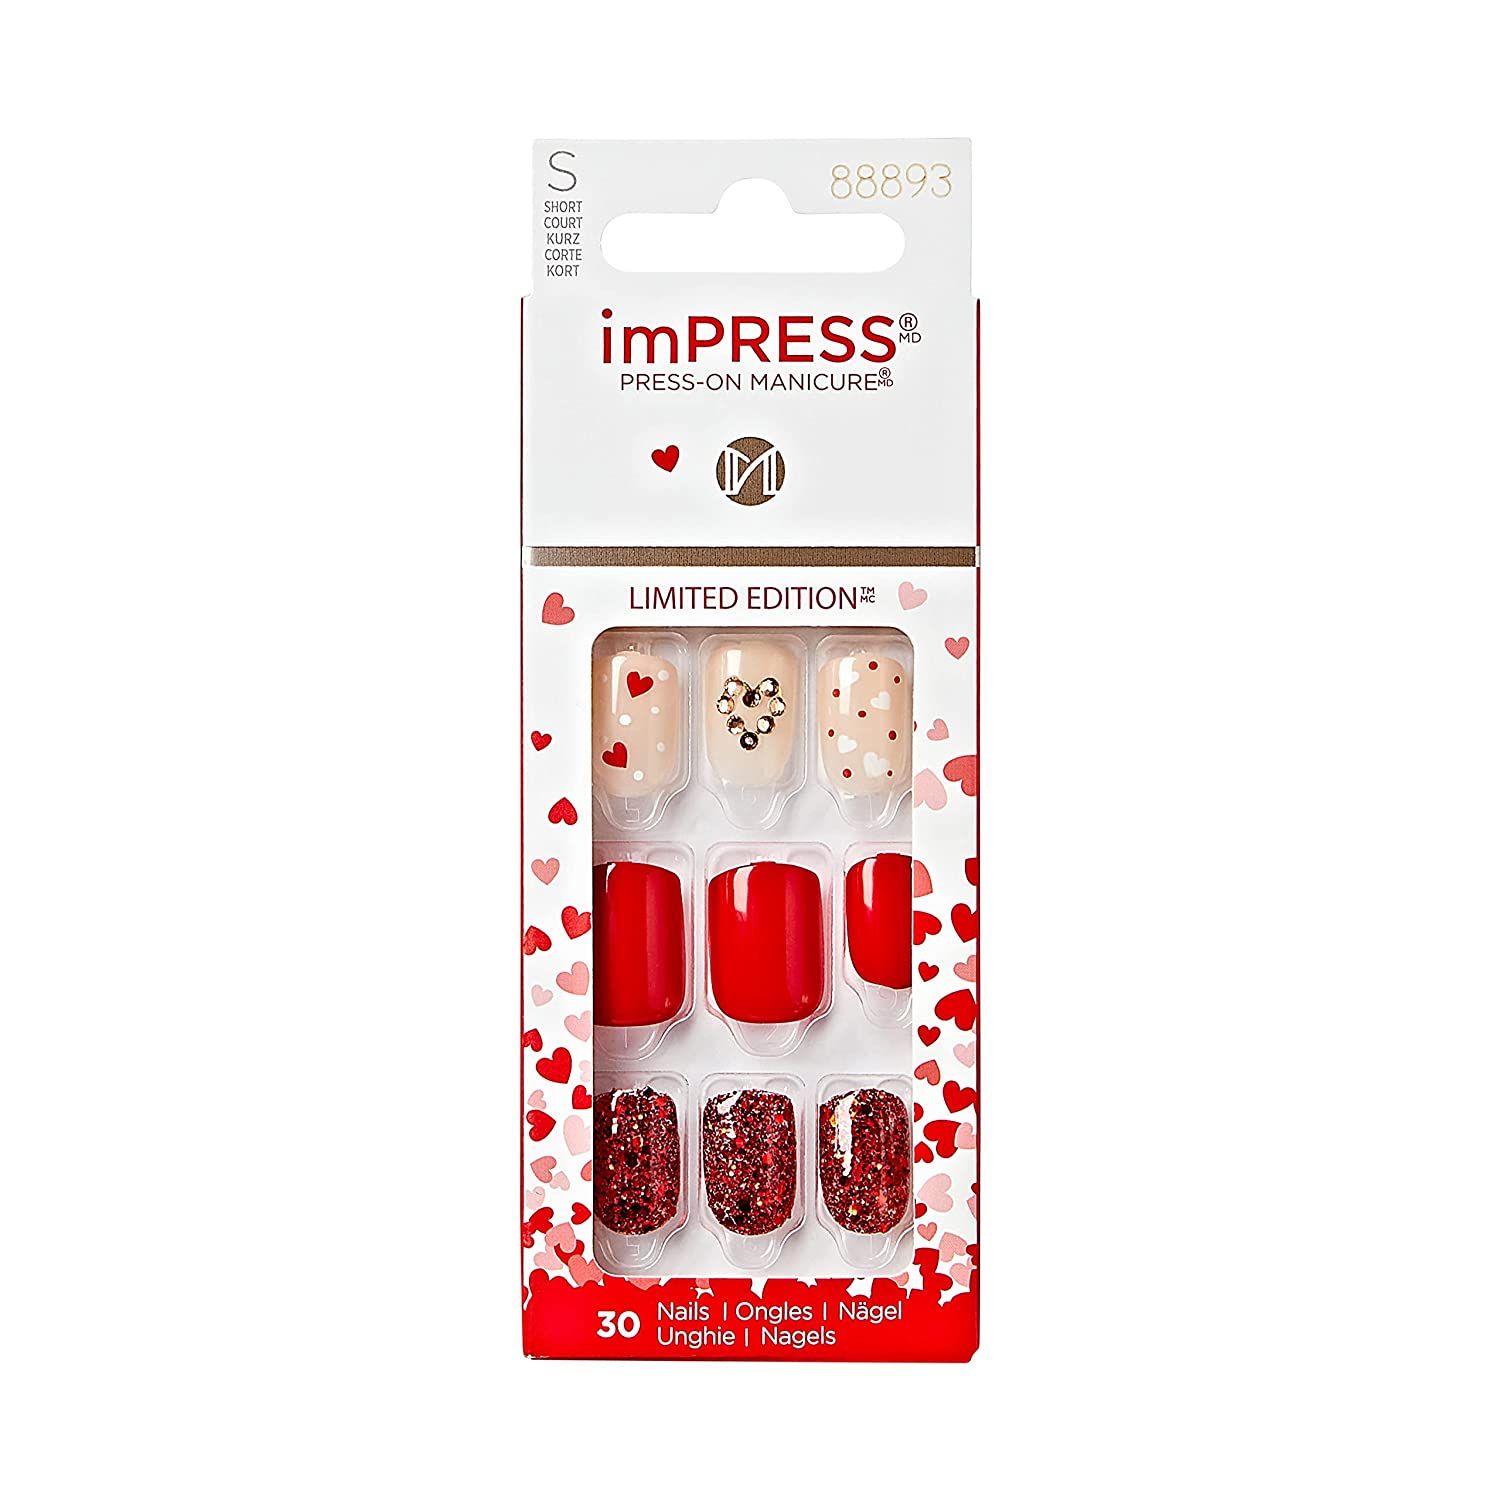 KISS imPRESS Press-On Manicure Limited Edition Valentine Nails, ‘Crazy Over You’, 30 Count | Amazon (US)